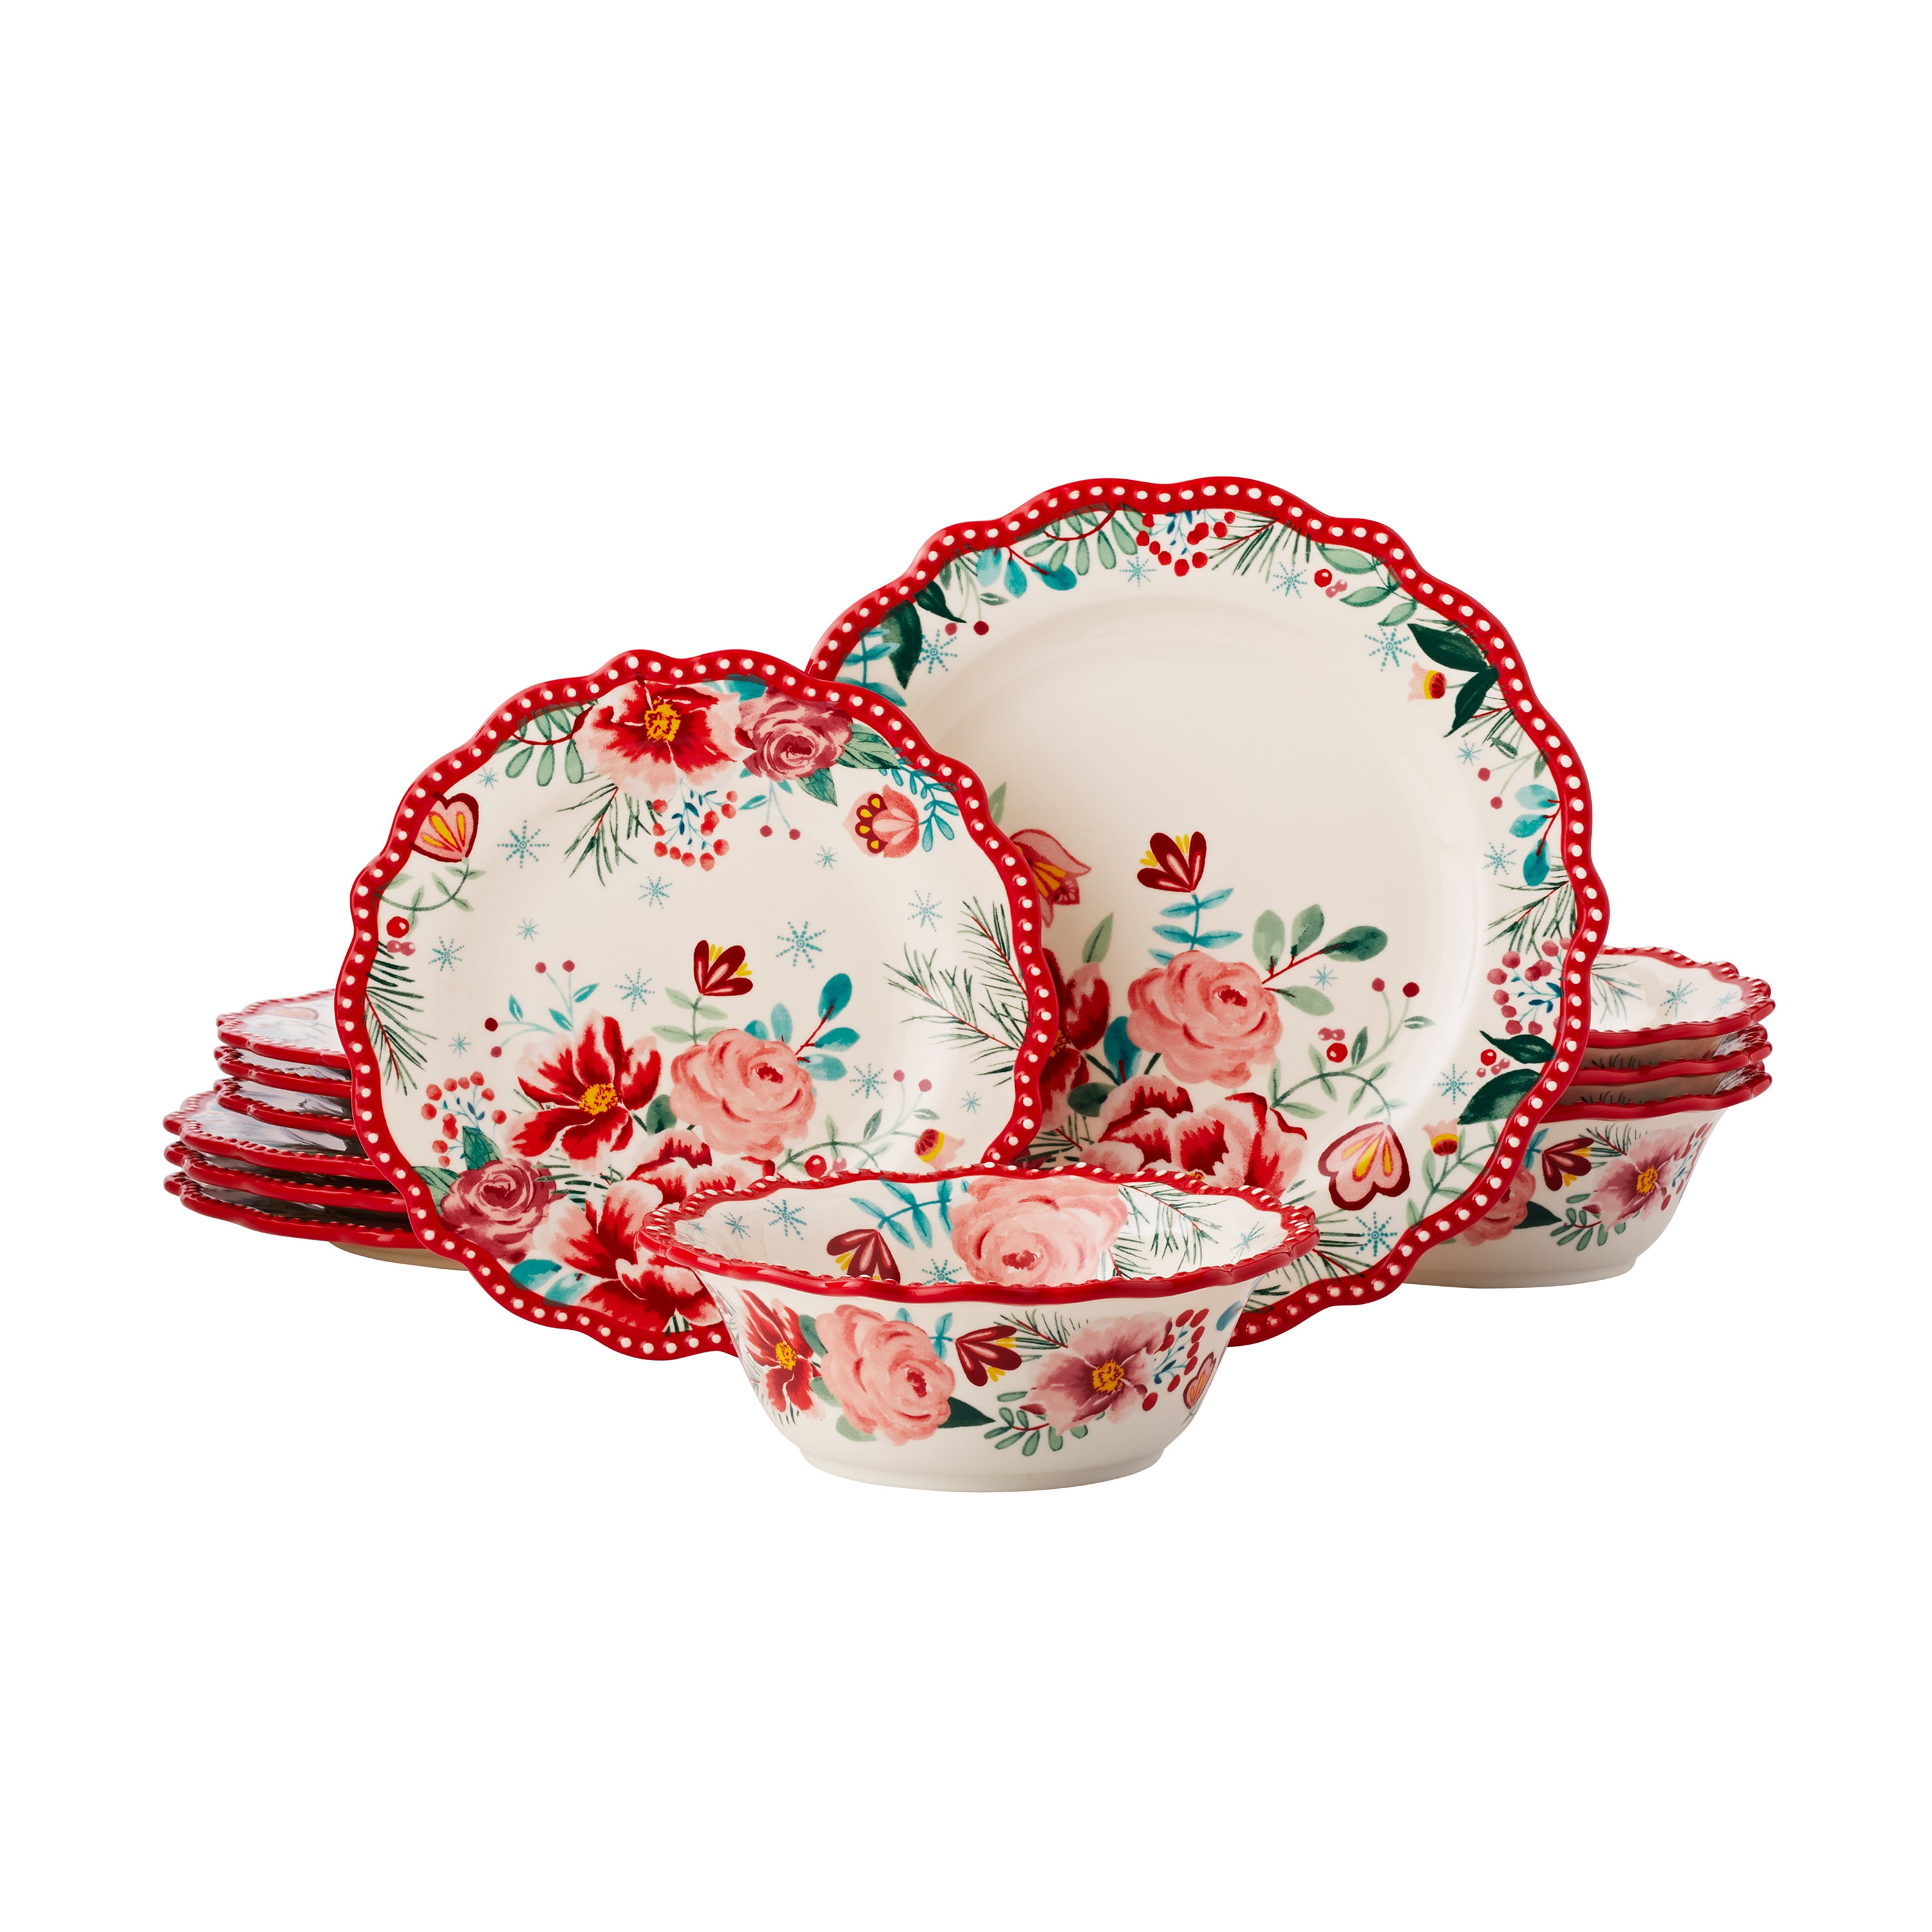 Pioneer Woman Mismatched Bowls Authentic Pioneer Women Collection